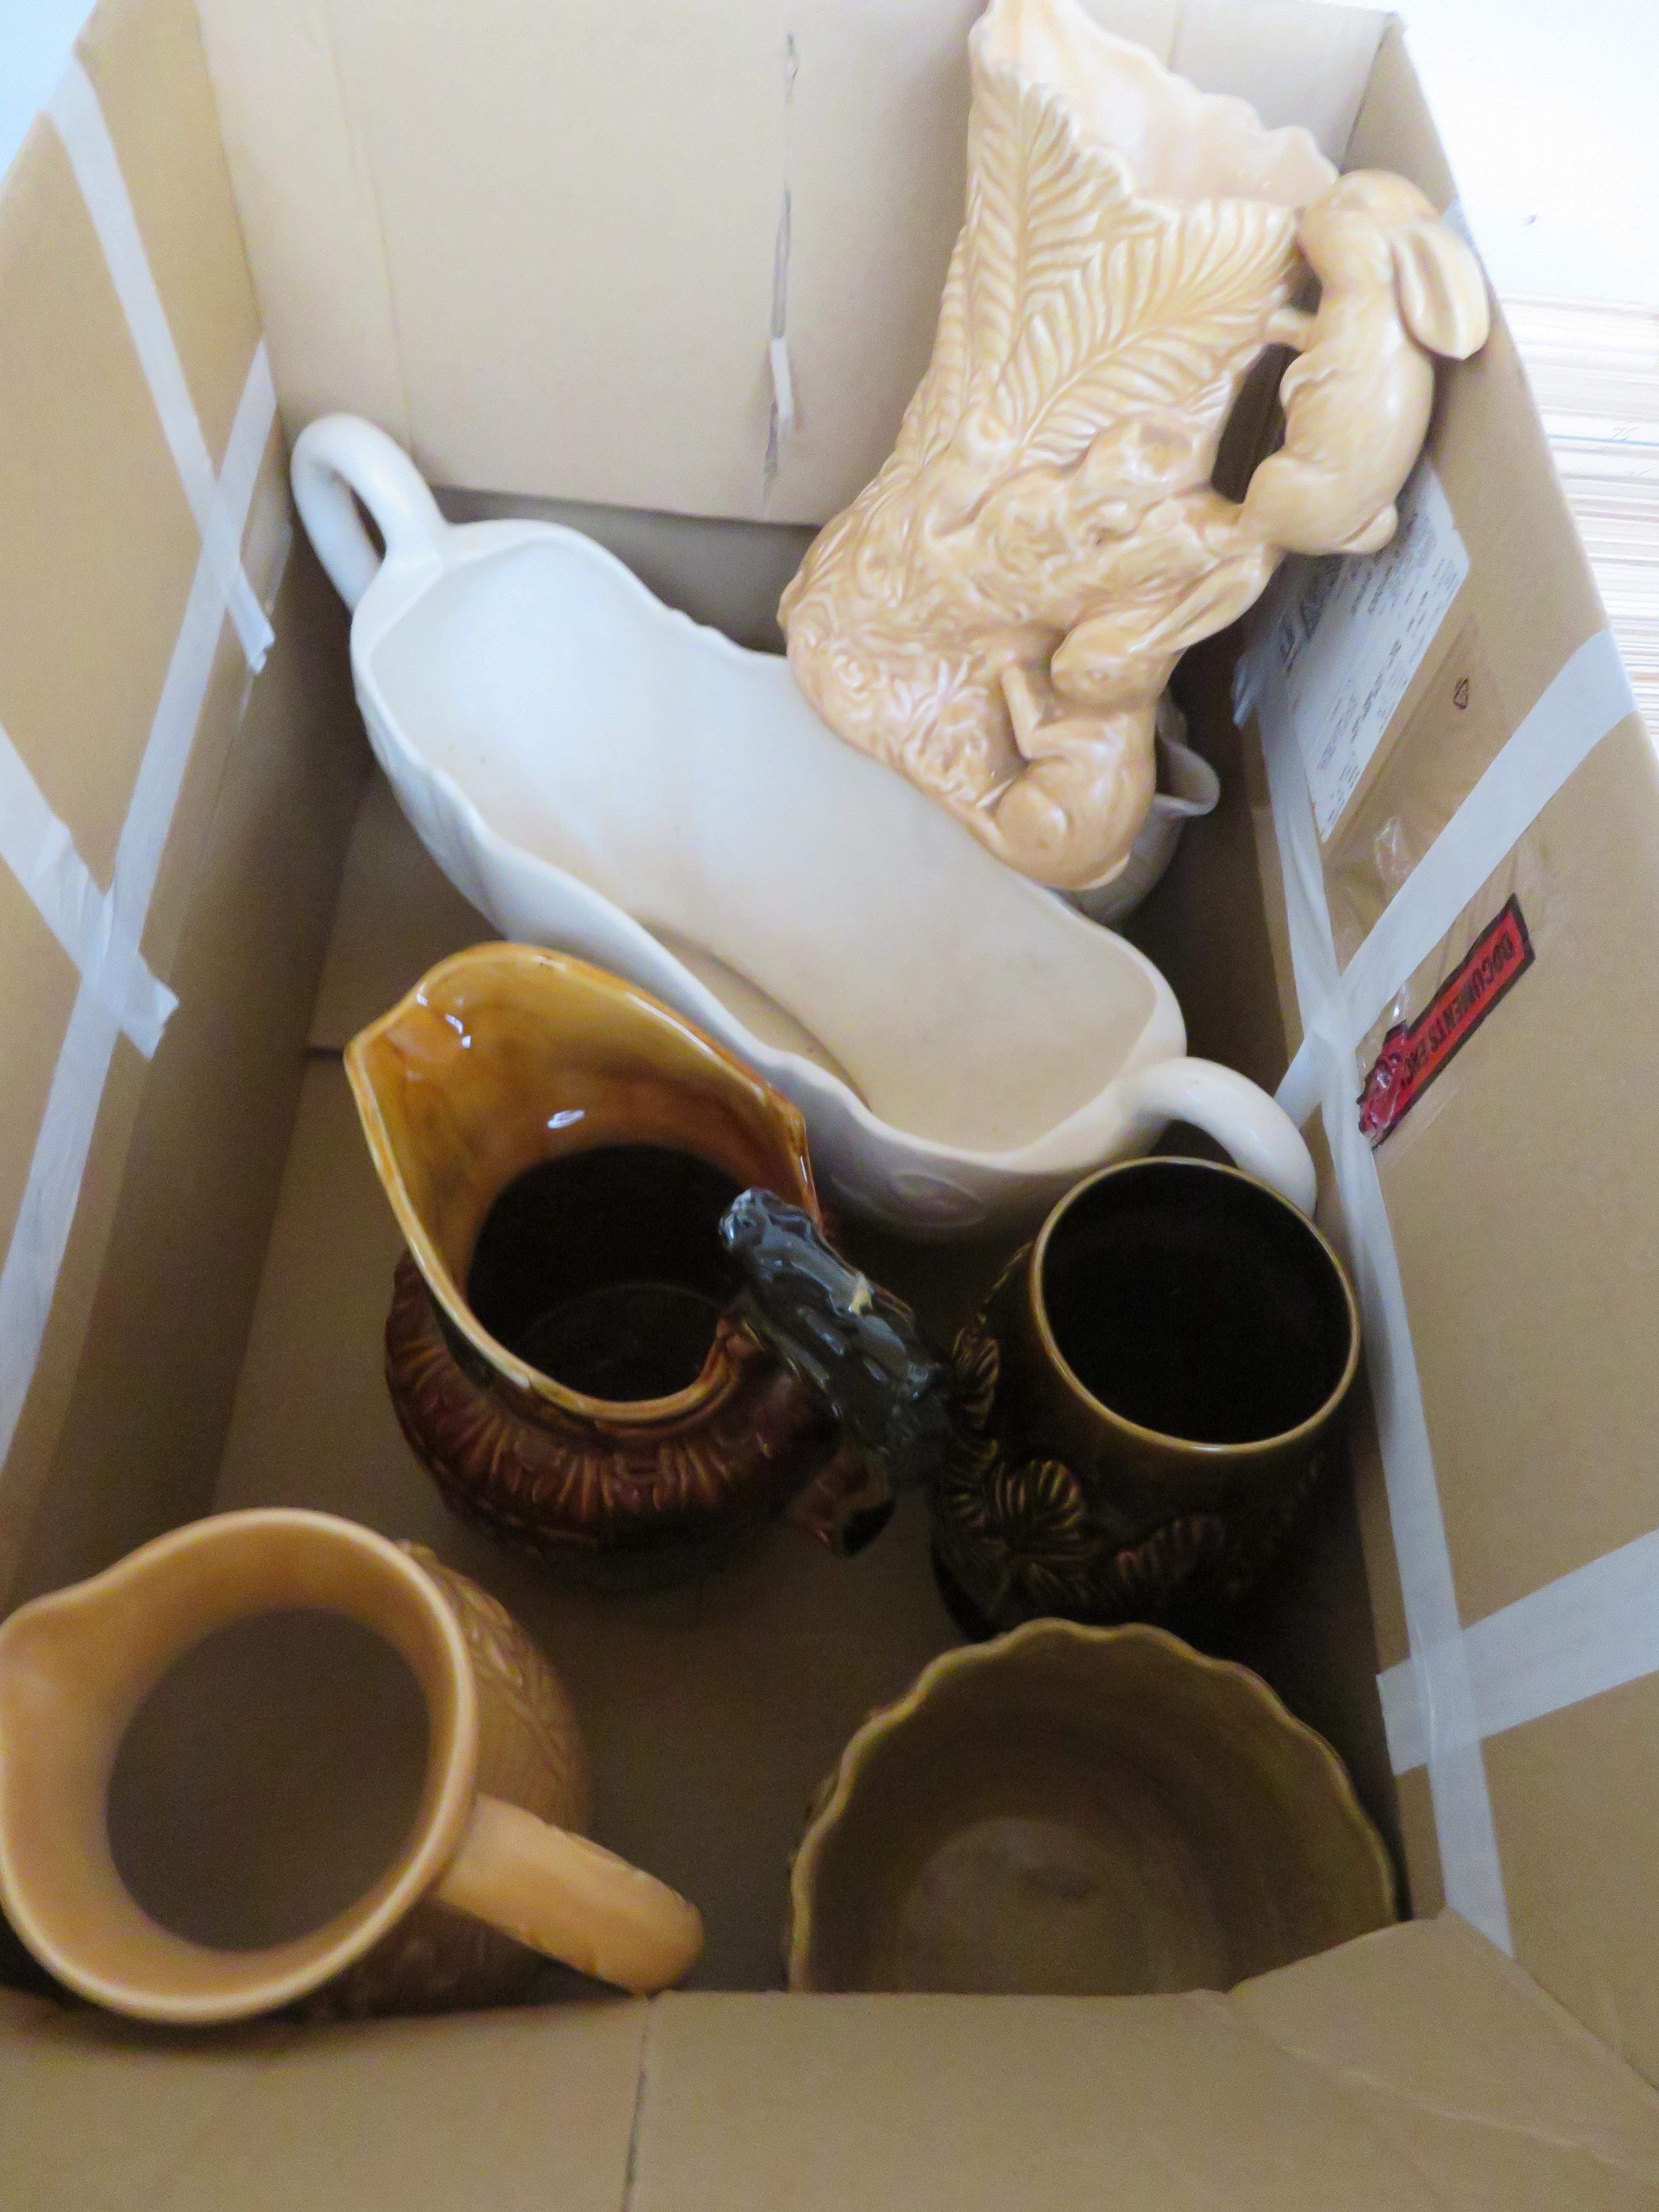 Box of jugs & planters to include sylvac